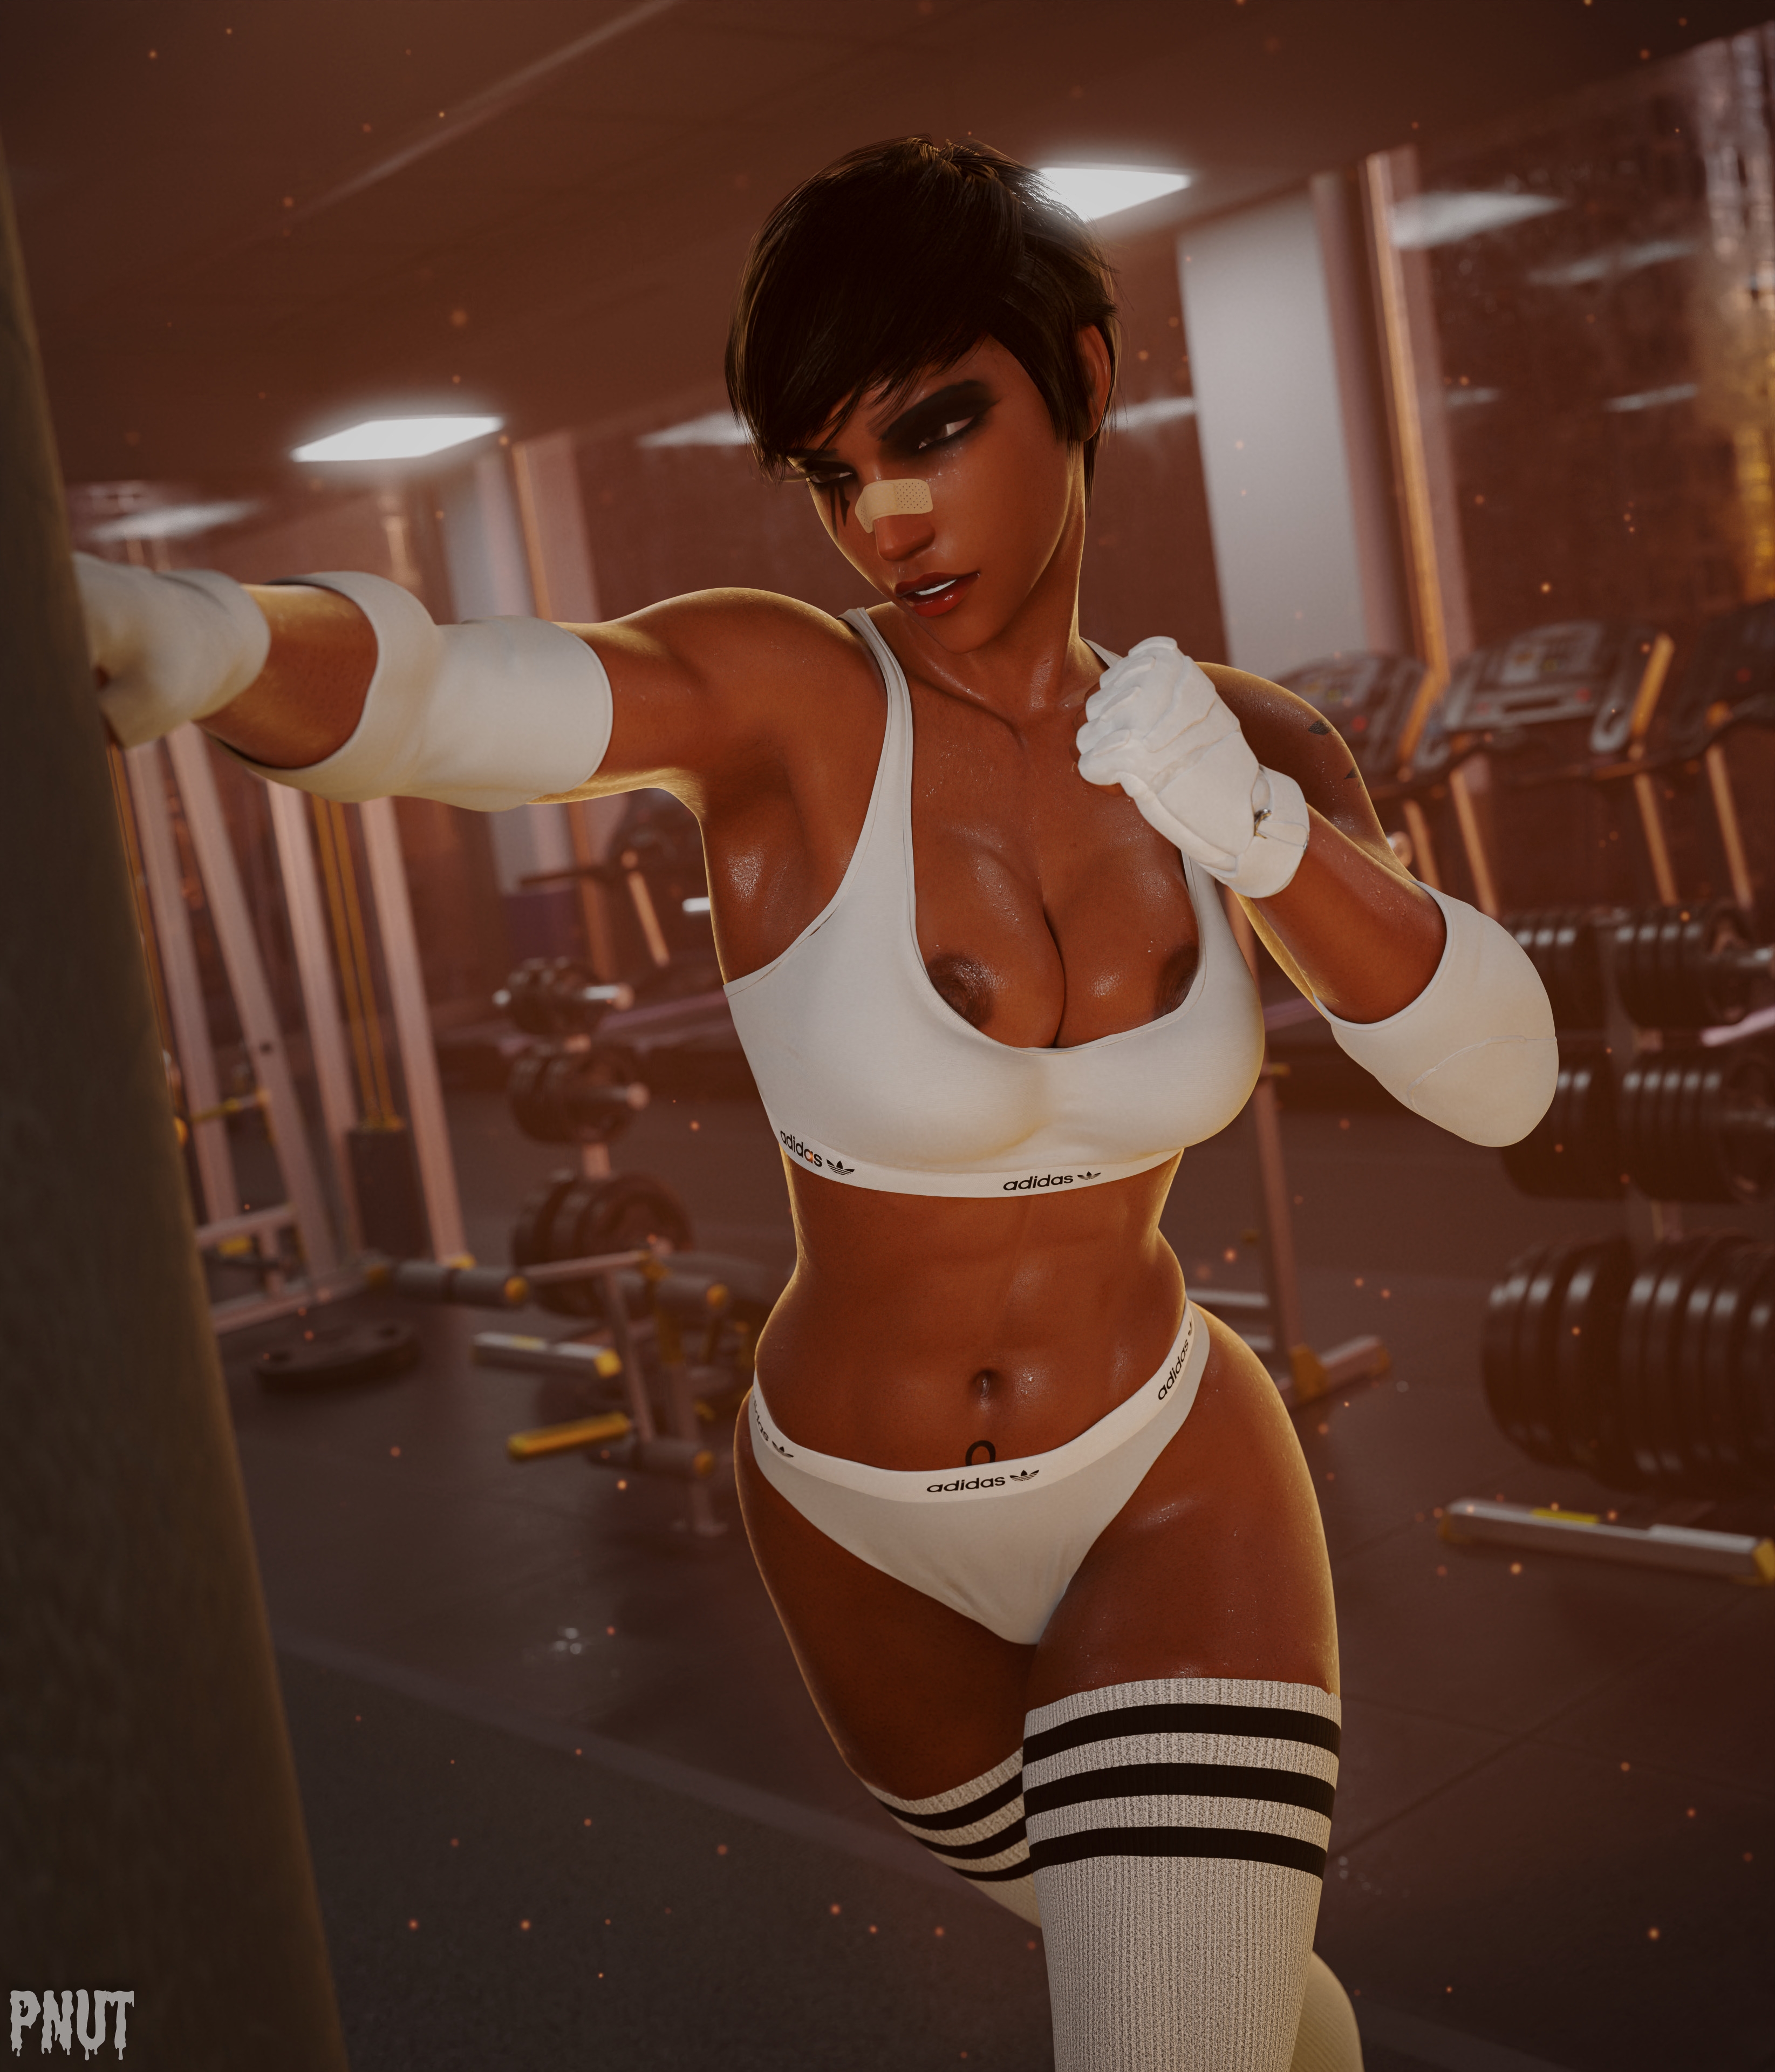 Pharah s late evening at the gym Overwatch Pharah Gym Workout Athletic Female